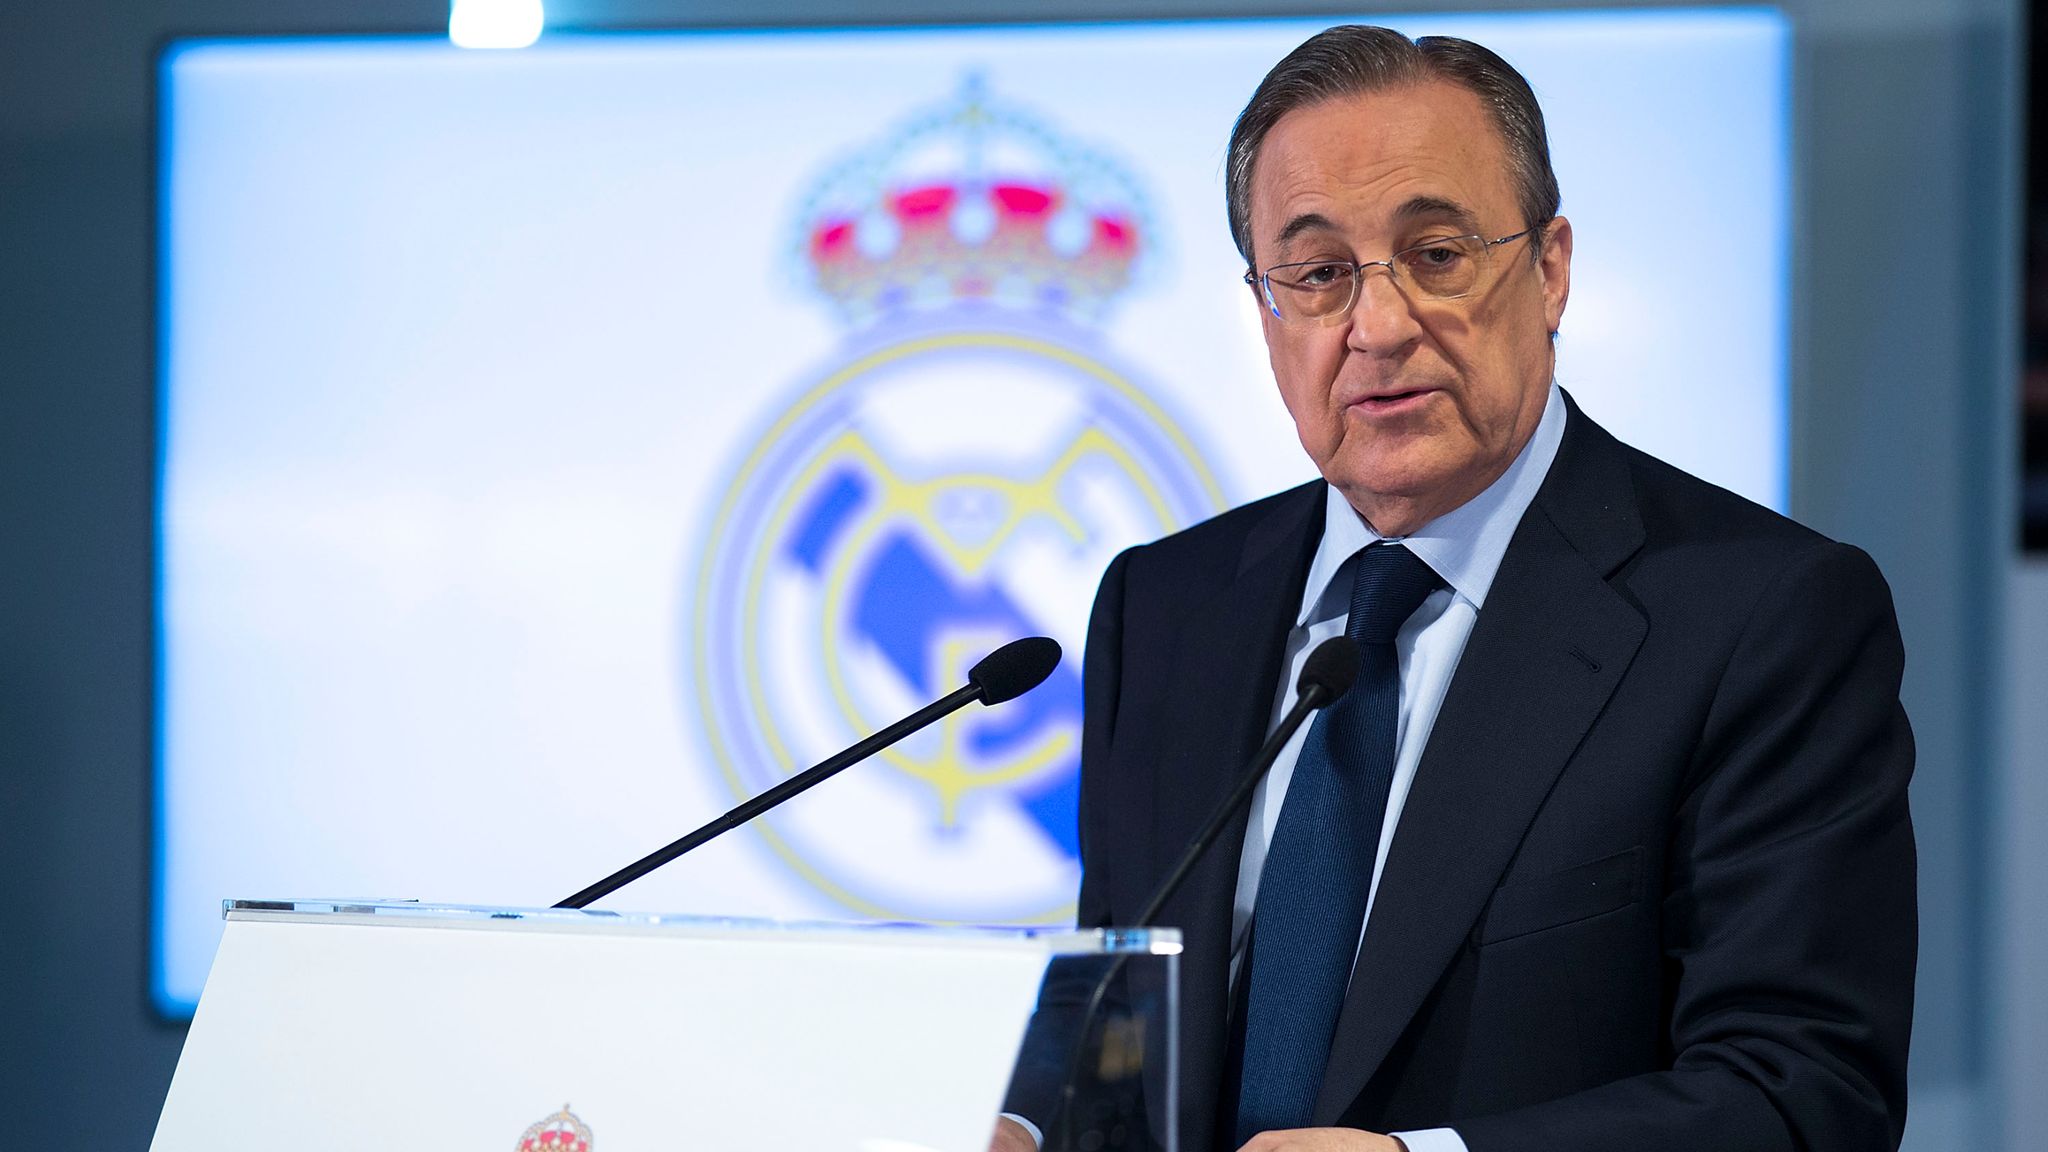 Florentino Perez to remain Real Madrid president until 2021